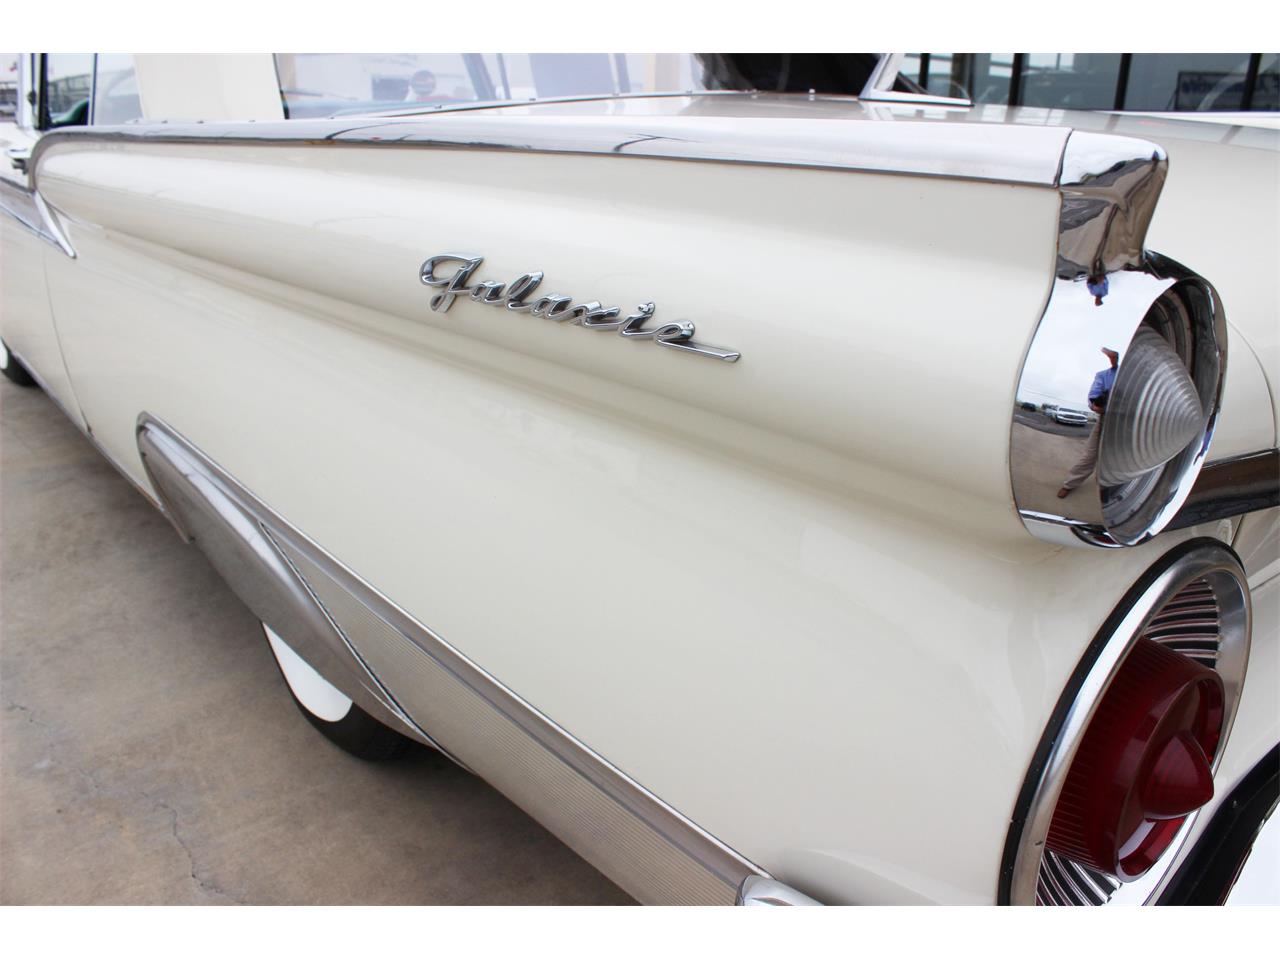 1959 Ford Galaxie 500 Sunliner for sale in Fort Worth, TX – photo 45